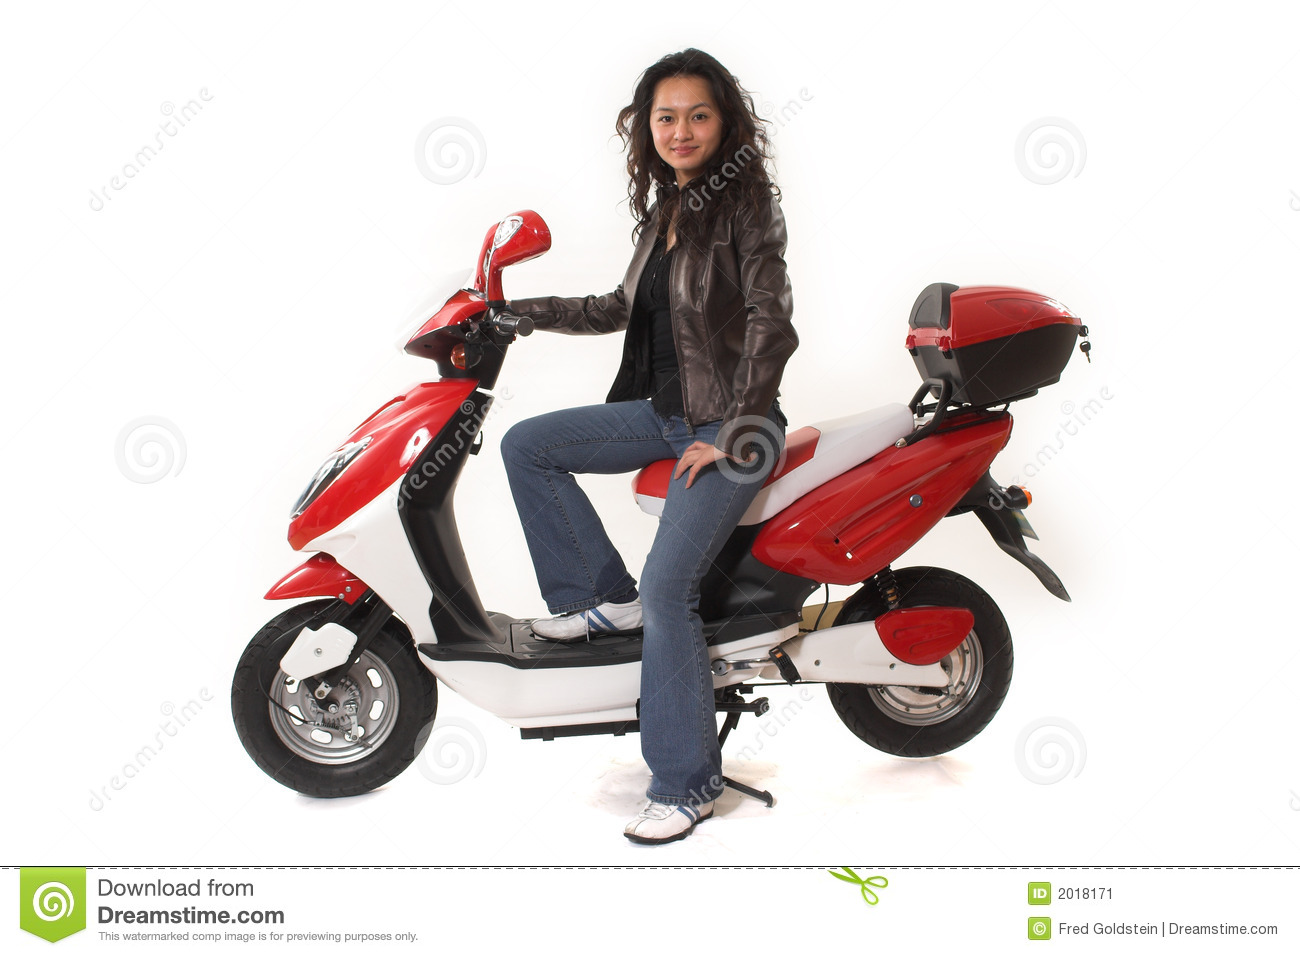 Woman Riding Electric Scooter With No Helmet Stock Image   Image    